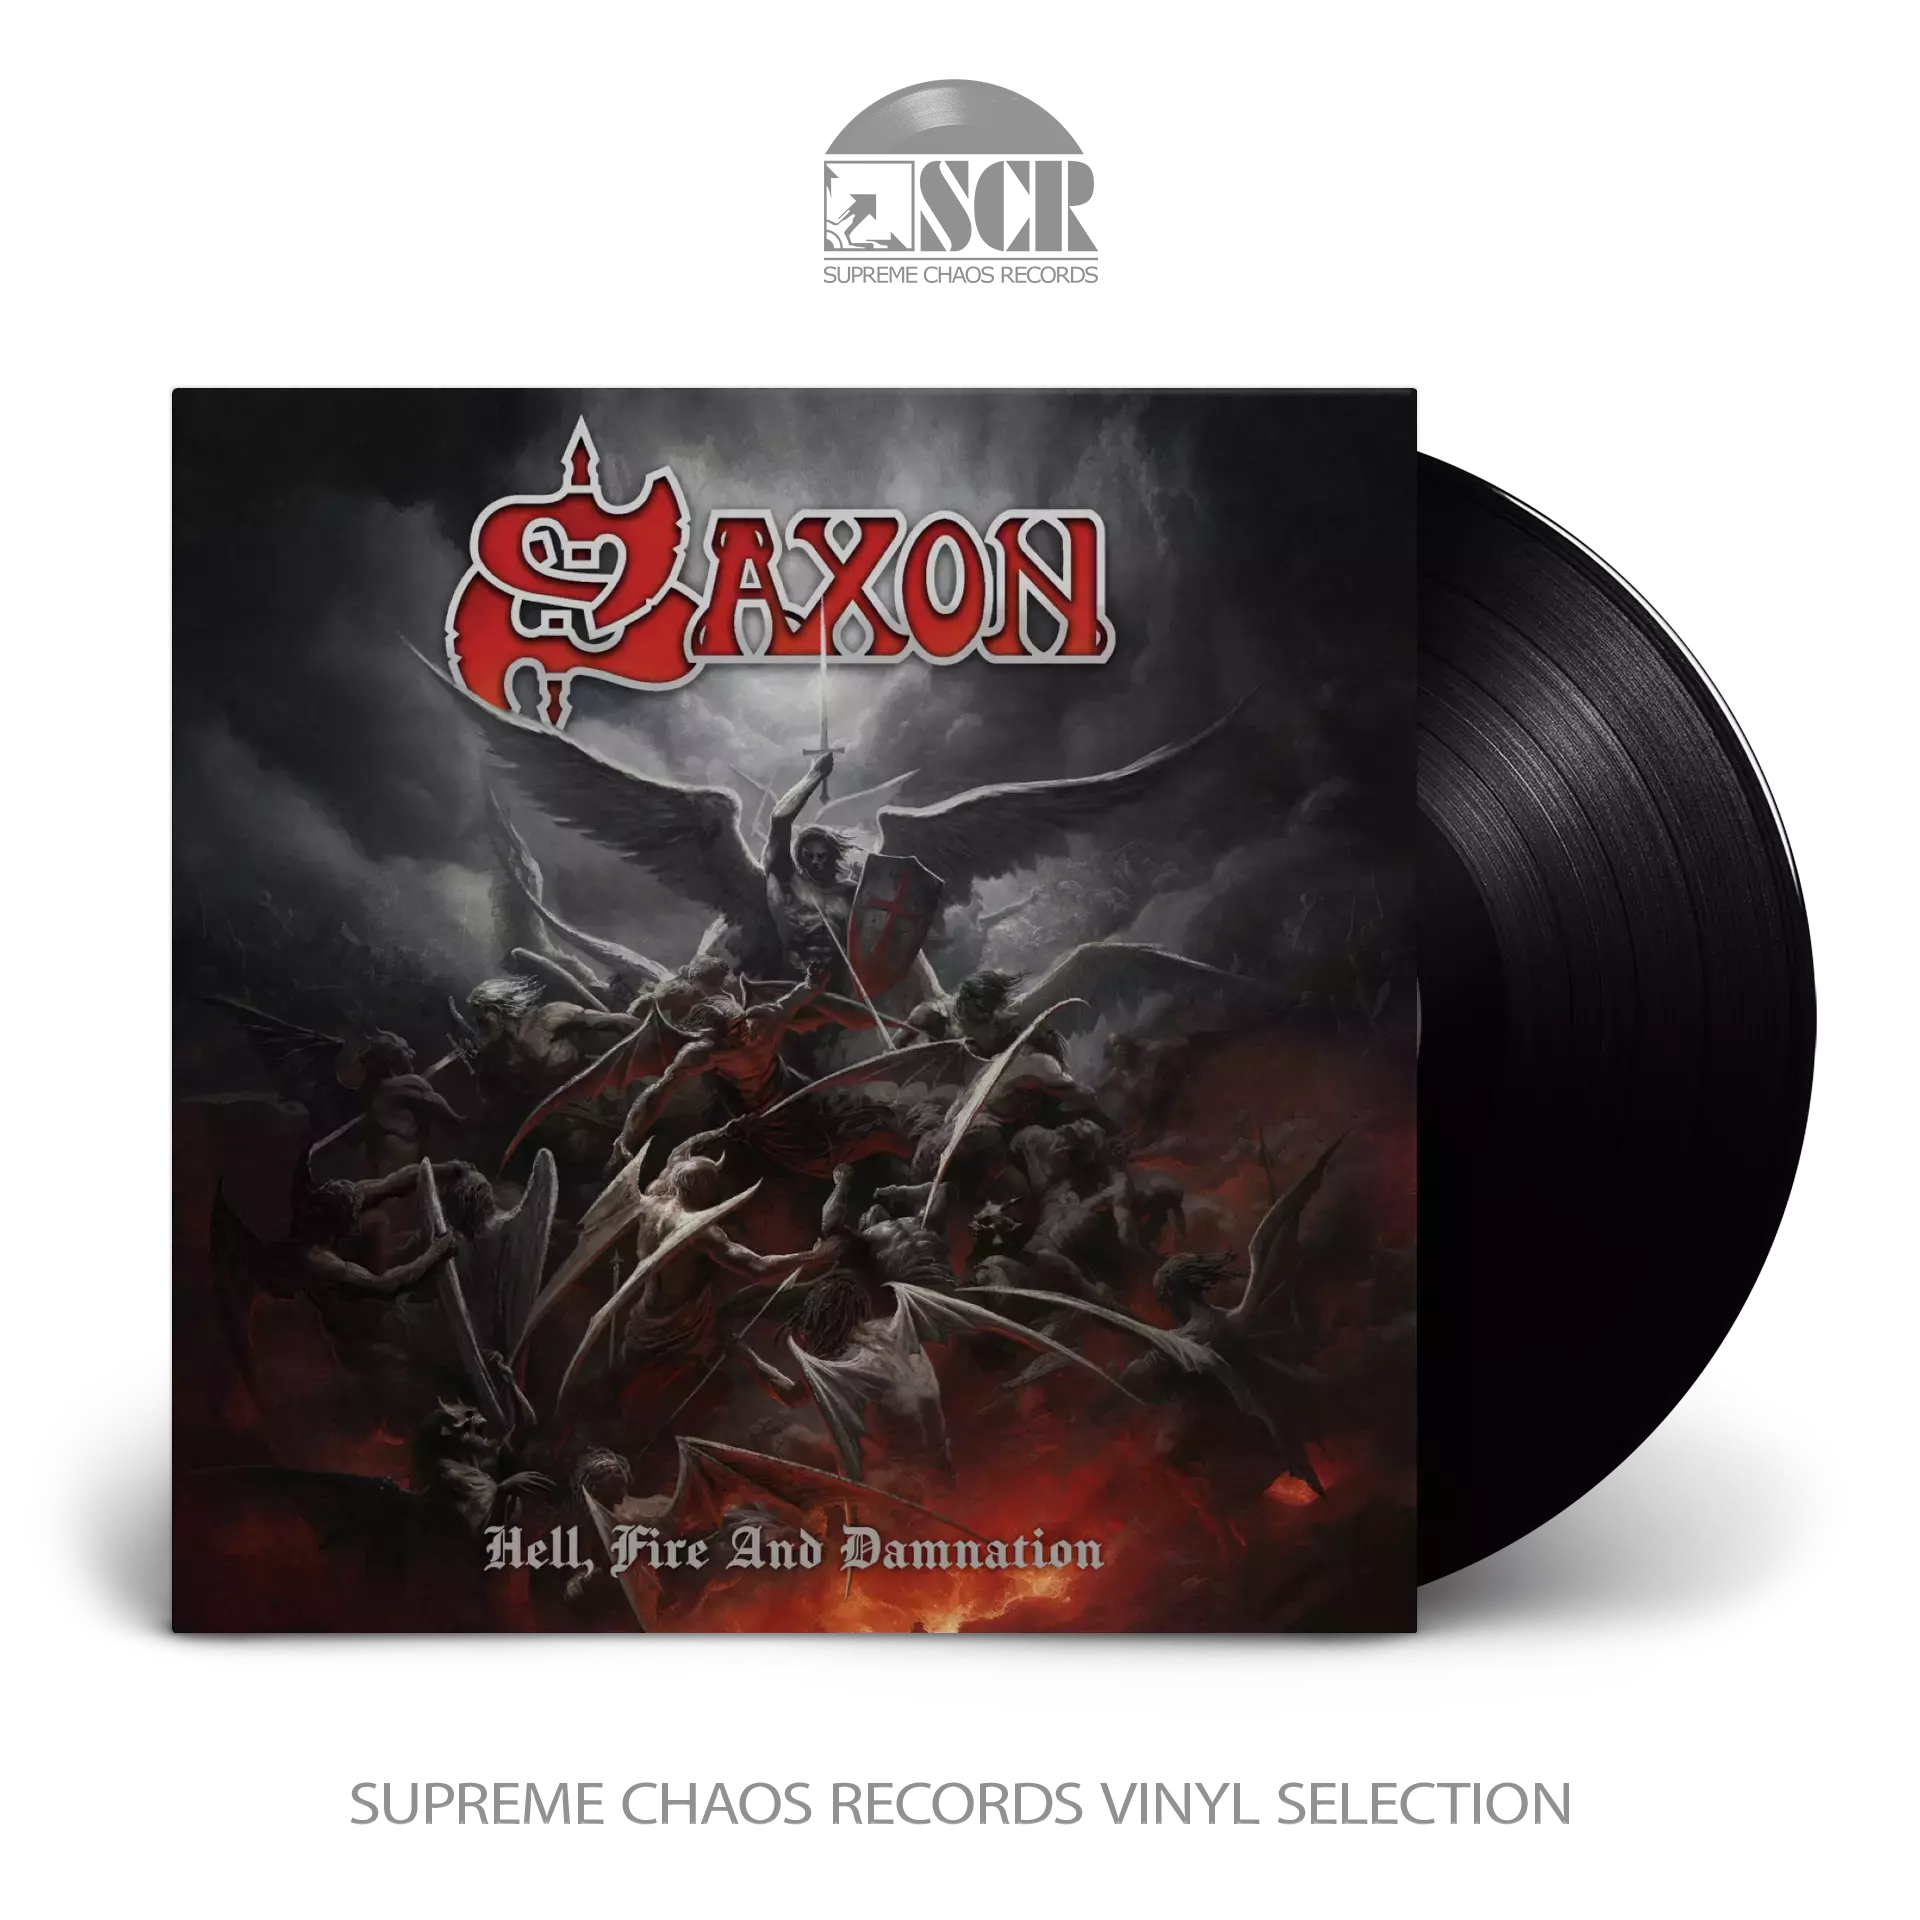 SAXON - Hell, Fire And Damnation [BLACK LP]